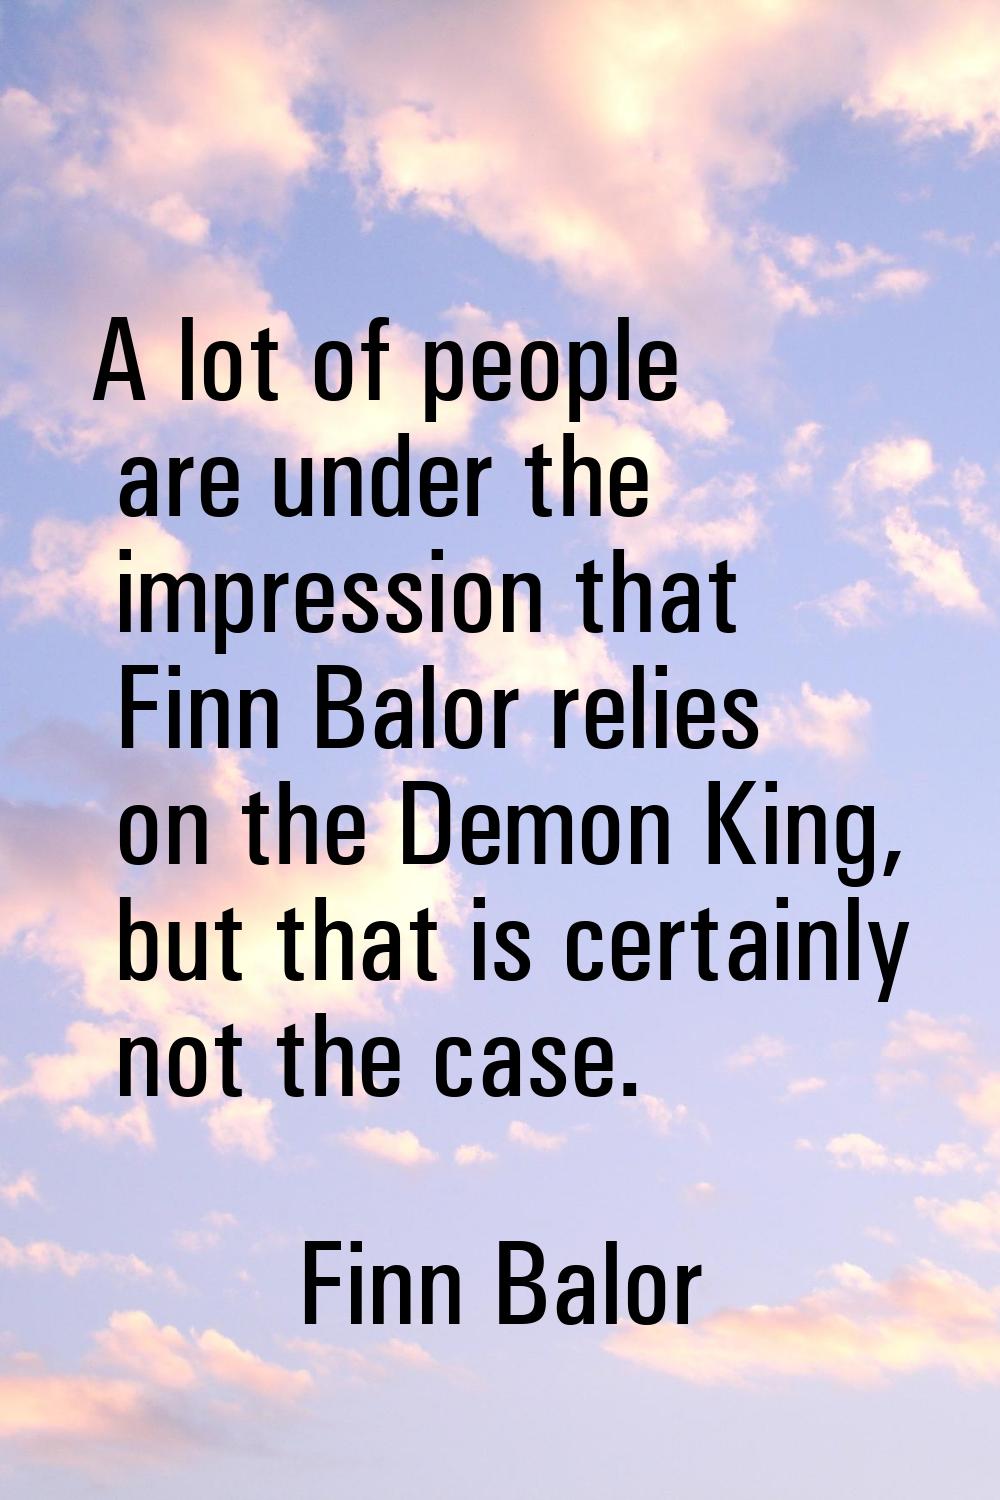 A lot of people are under the impression that Finn Balor relies on the Demon King, but that is cert